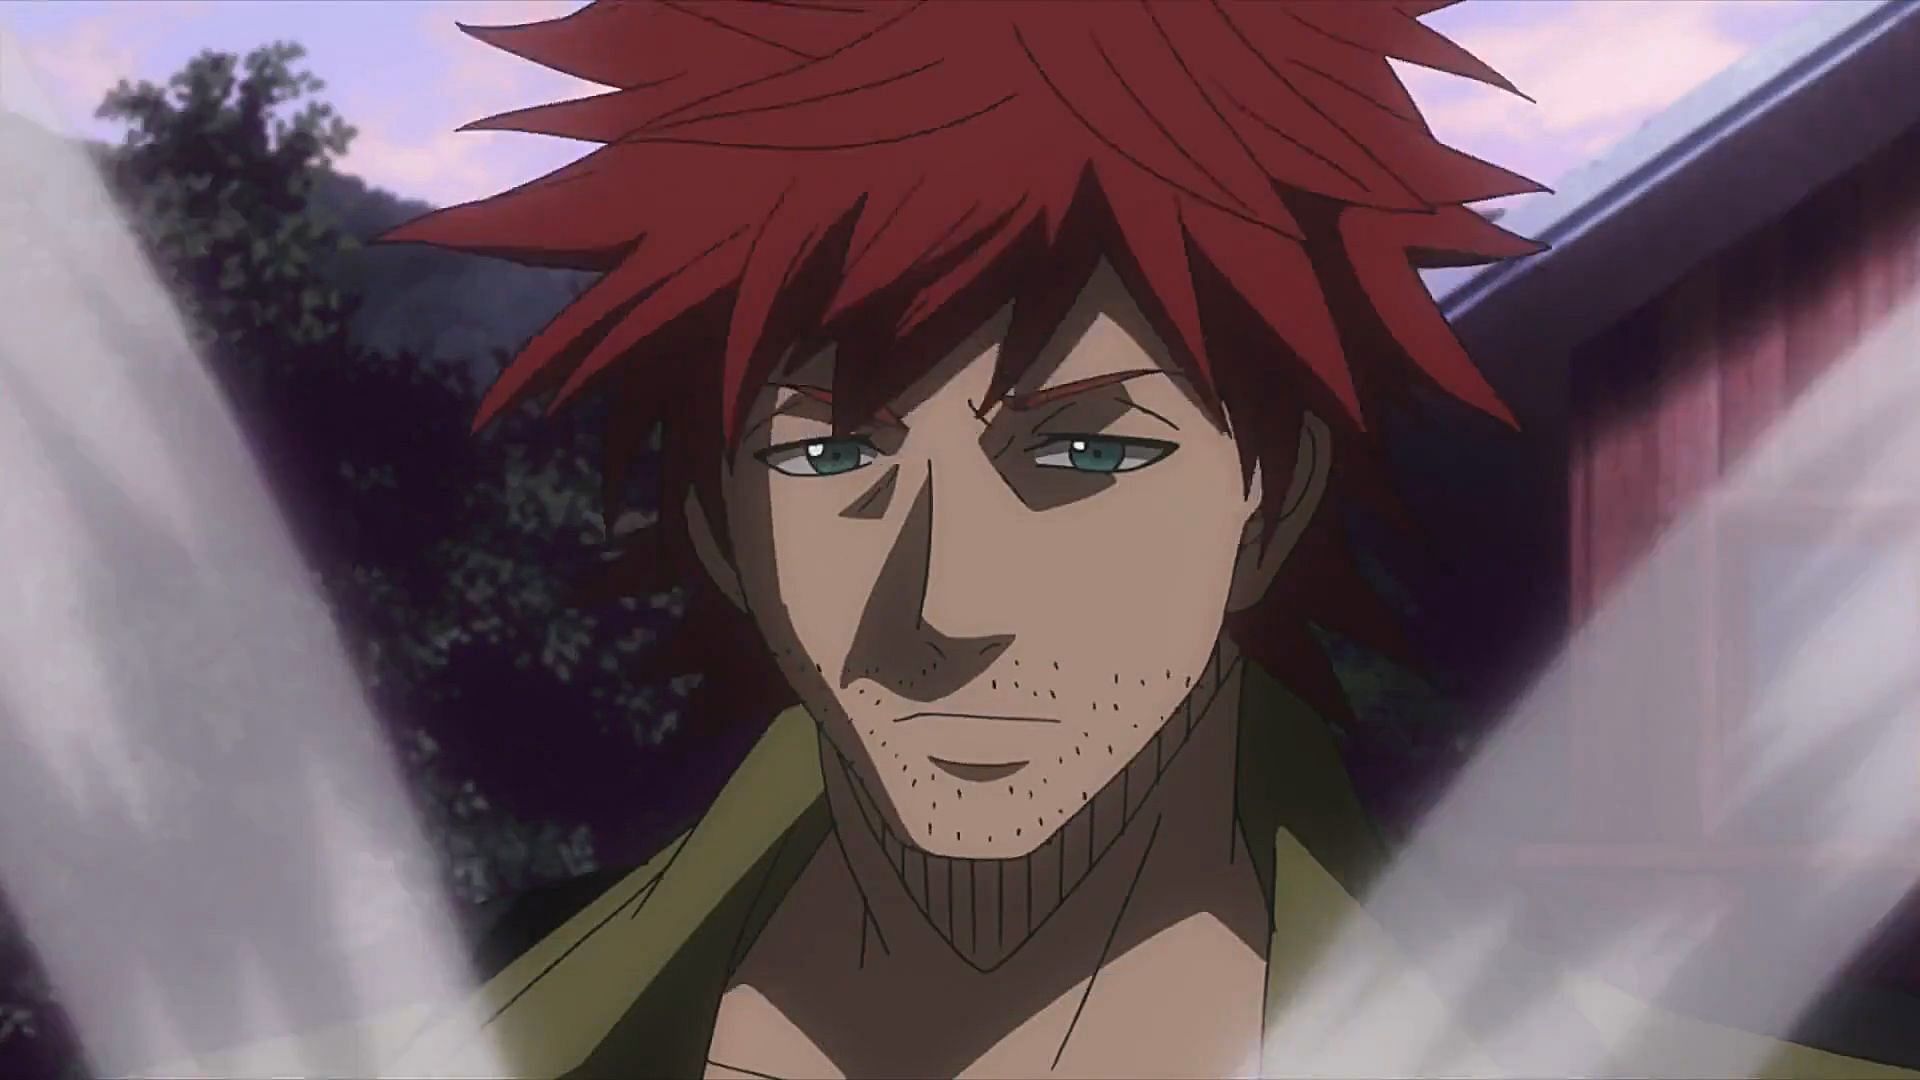 Fanzell Kruger as seen in the anime (Image via Studio Pierrot)